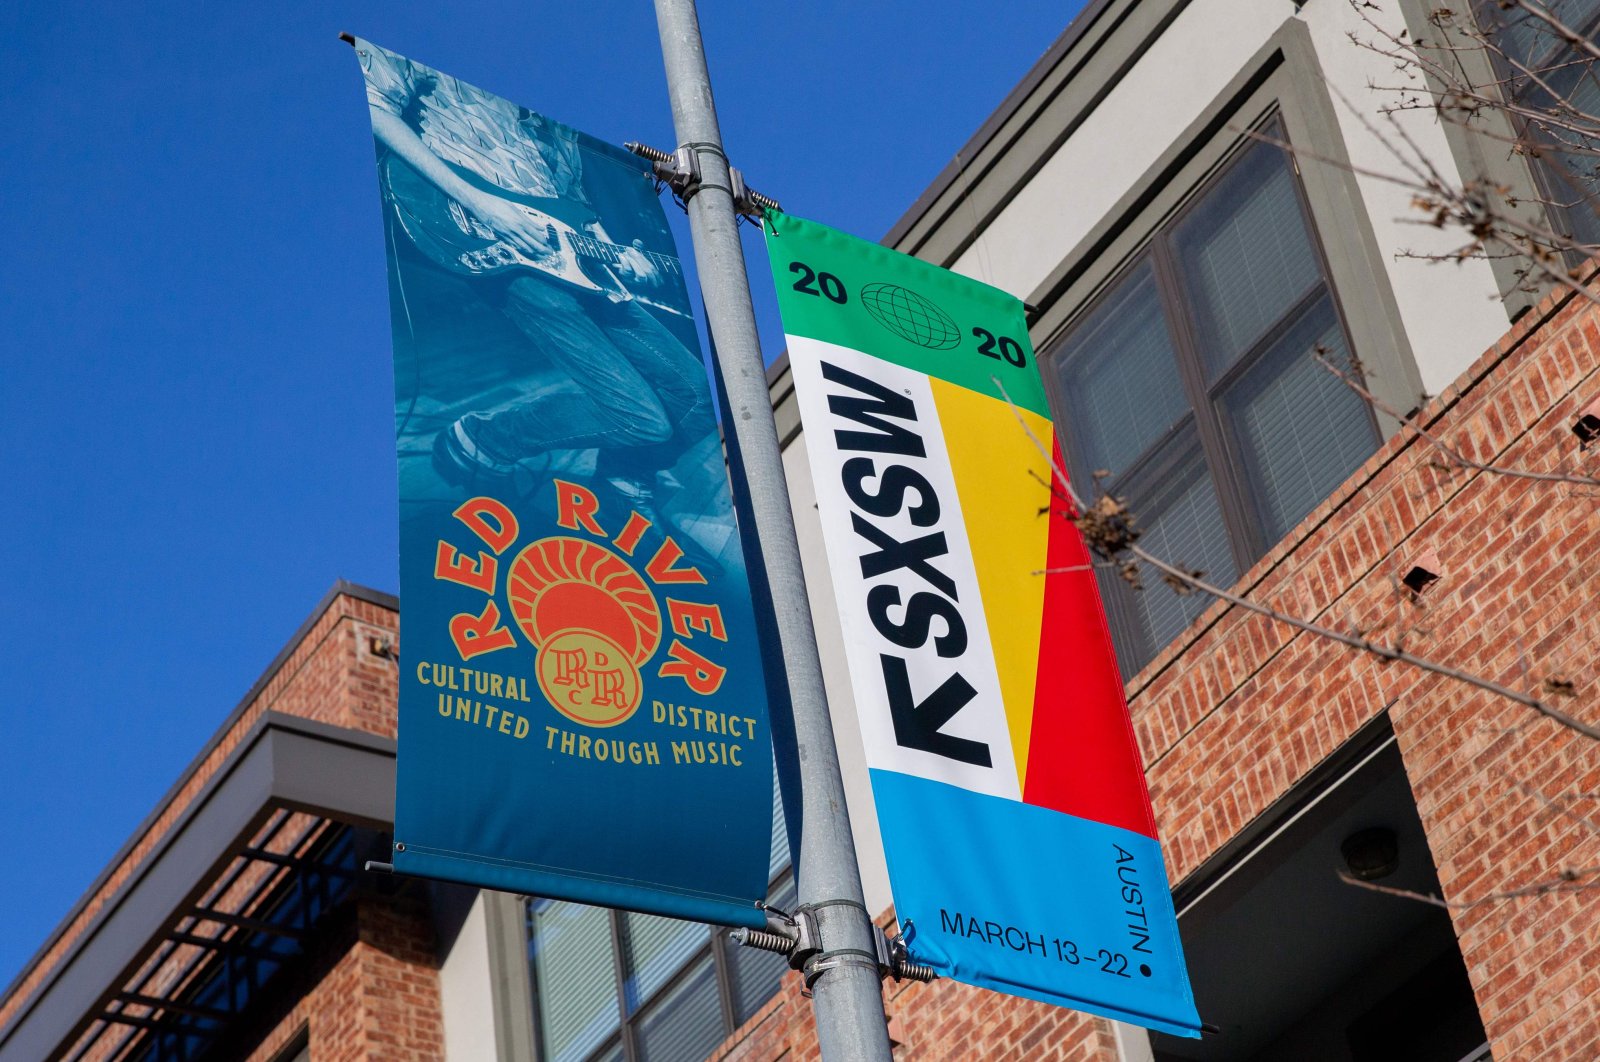 SXSW 2020 banners are seen in the Red River Cultural District on March 6, 2020 in Austin Texas. (AFP Photo)